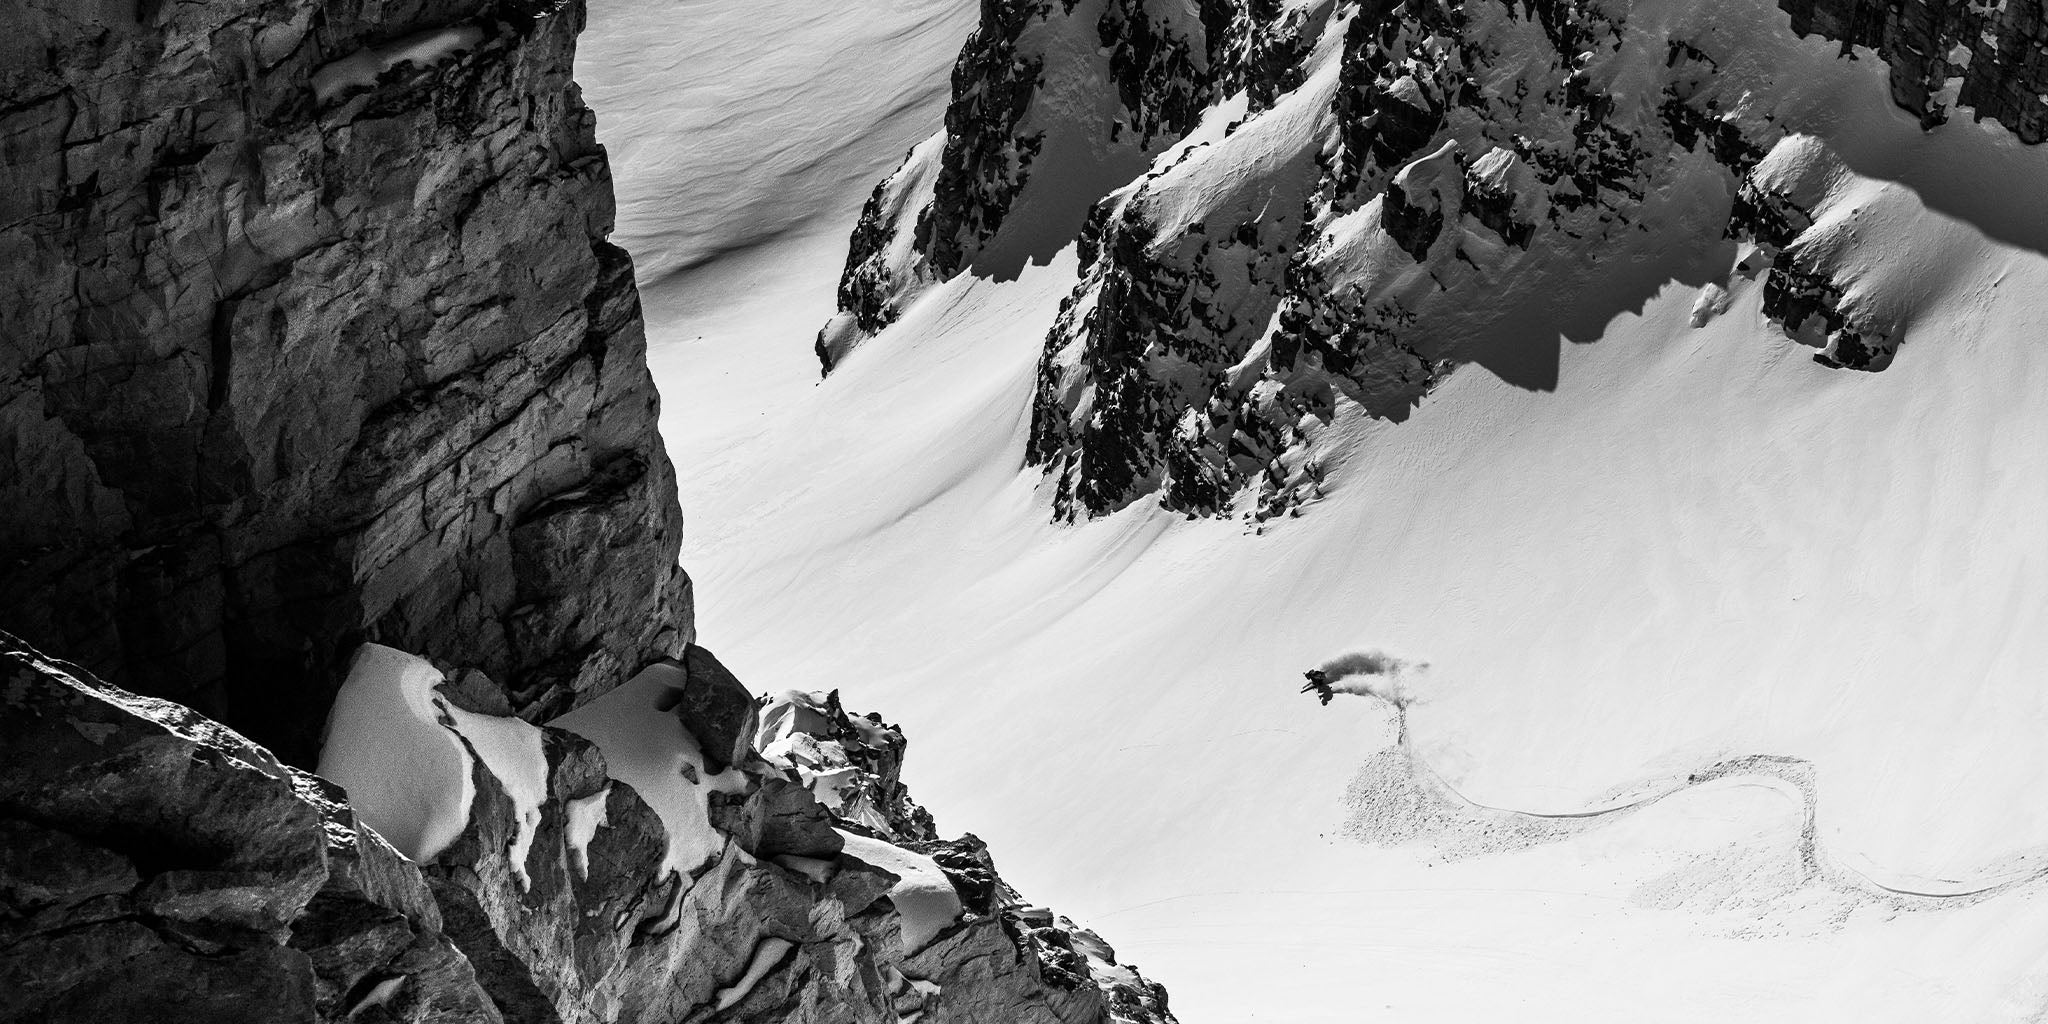 REFLECTIONS ON BACKCOUNTRY SKIING FROM CODY TOWNSEND AND IAN PROVO